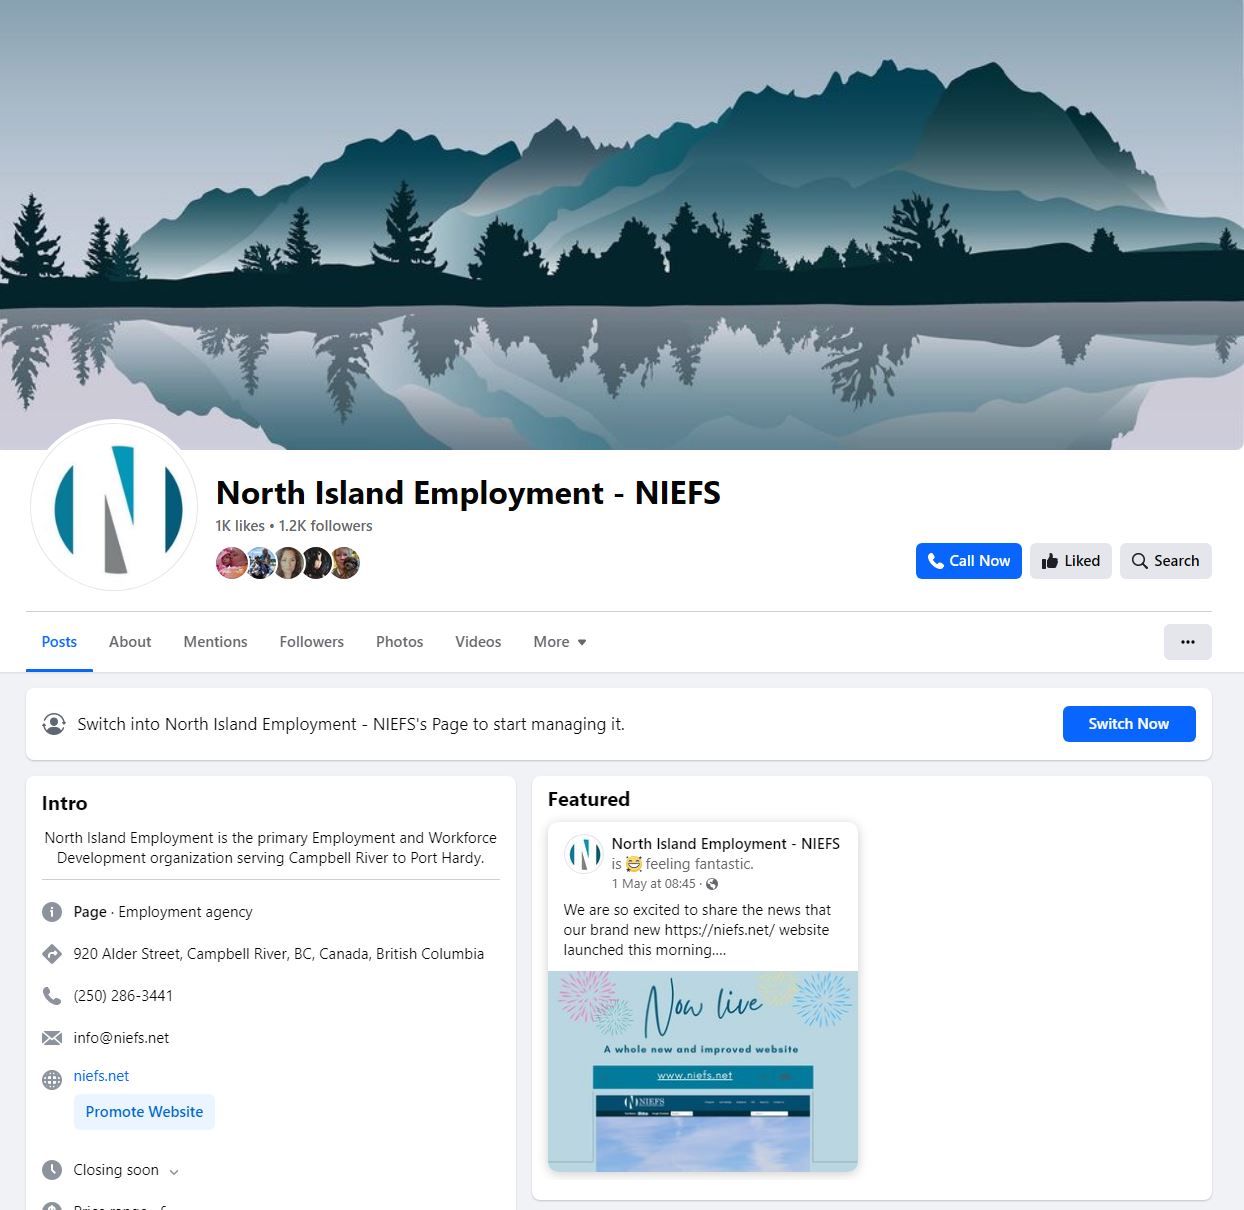 Screen shot of the NIEFS Facebook page at https://www.facebook.com/NorthIslandEmployment